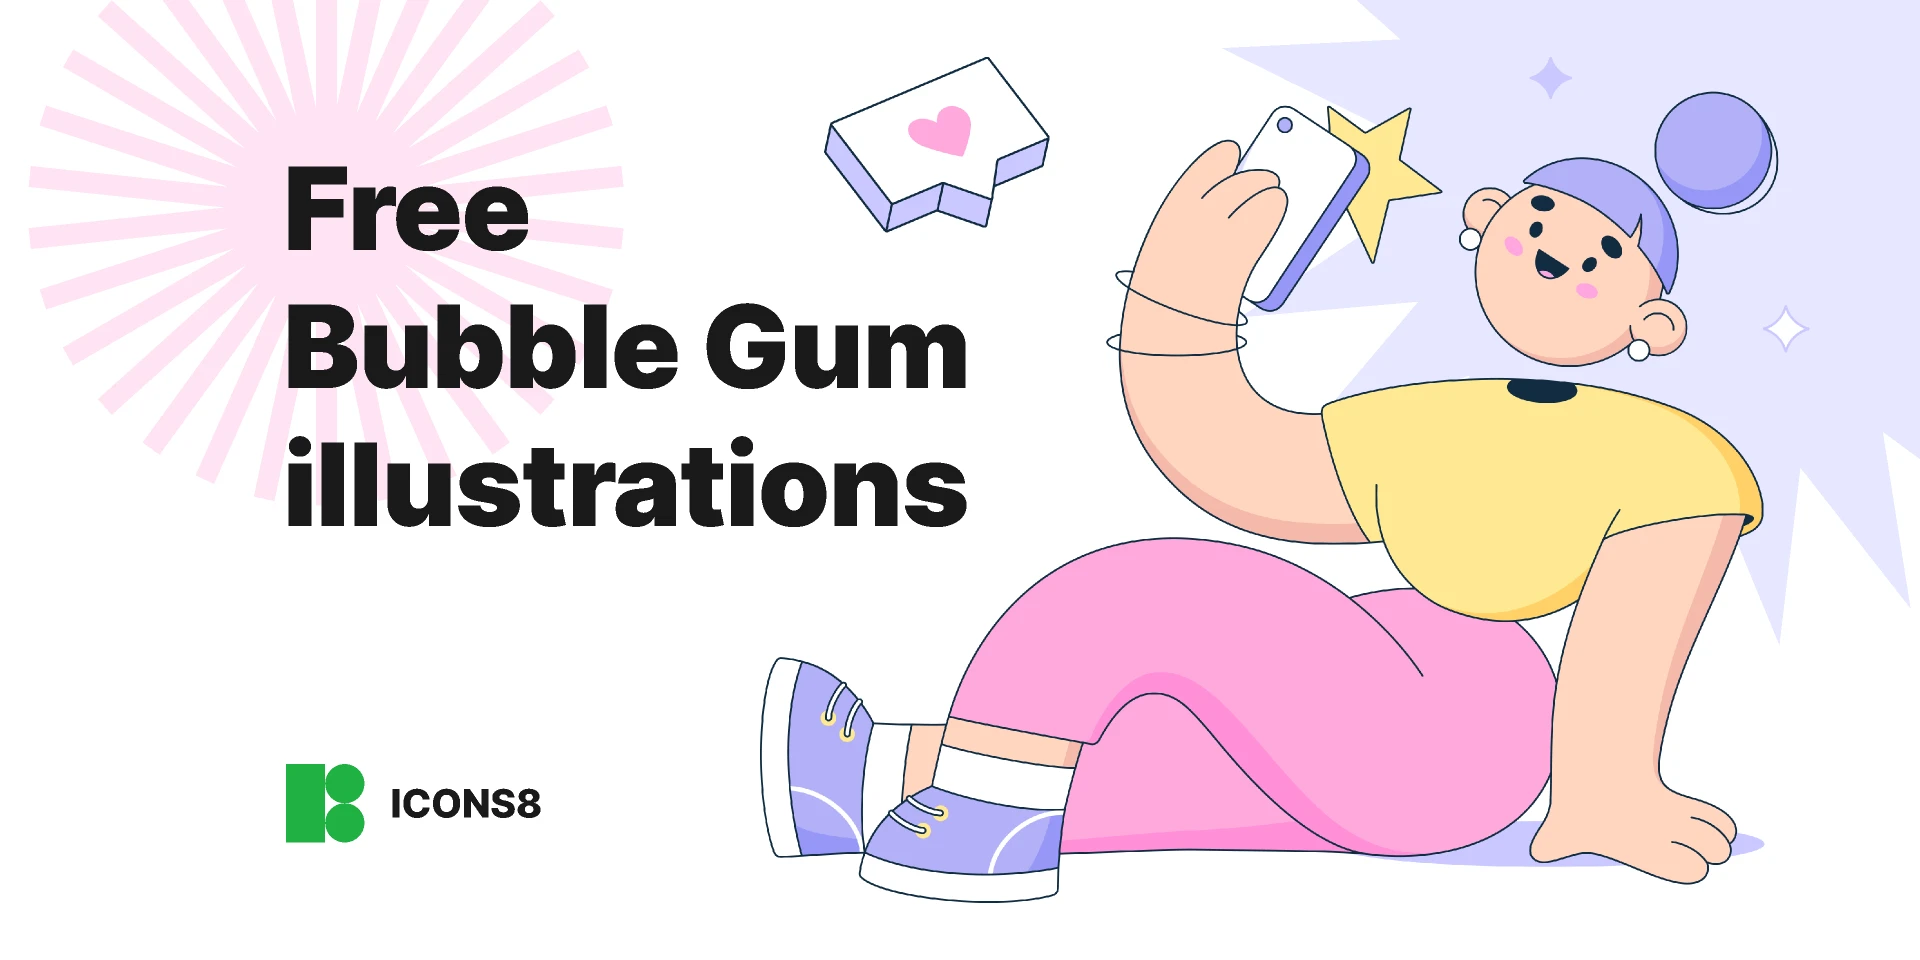 Free Bubble Gum illustrations in PNG for Figma and Adobe XD